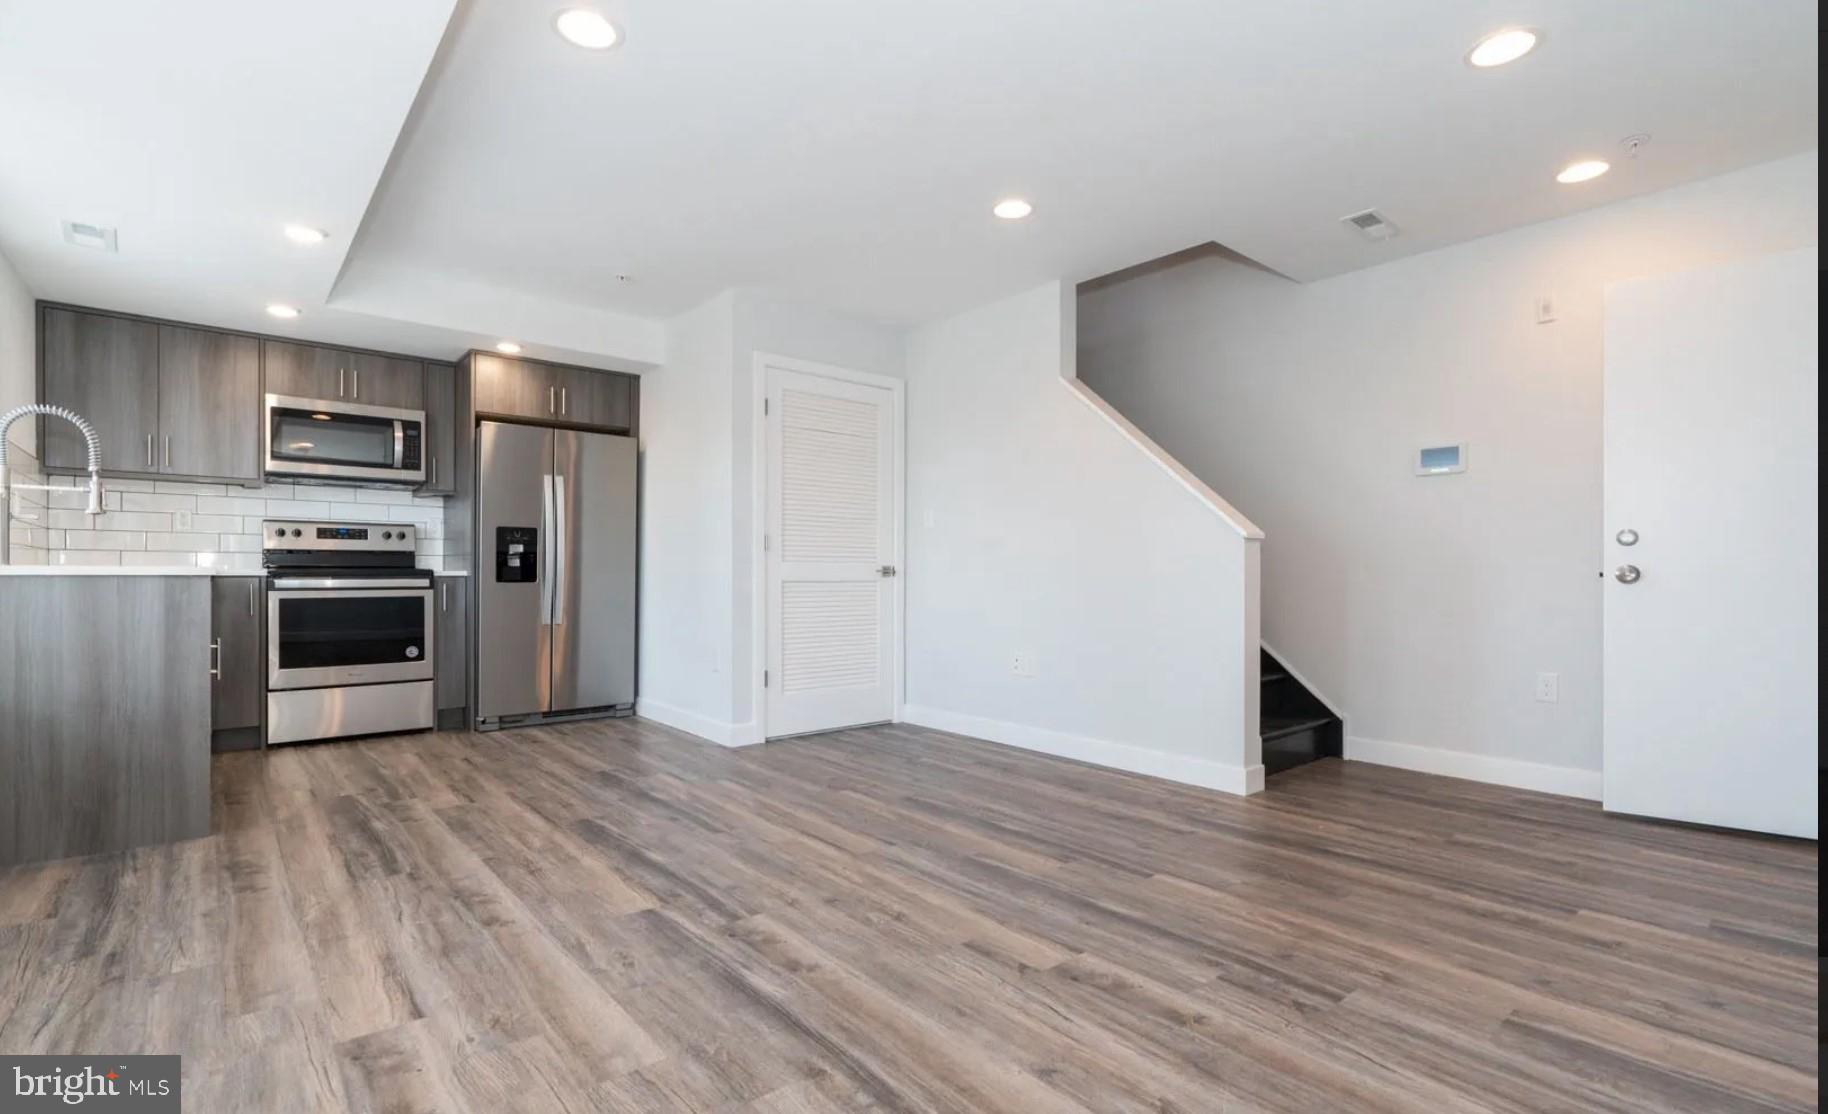 an empty room with wooden floor and stainless steel appliances